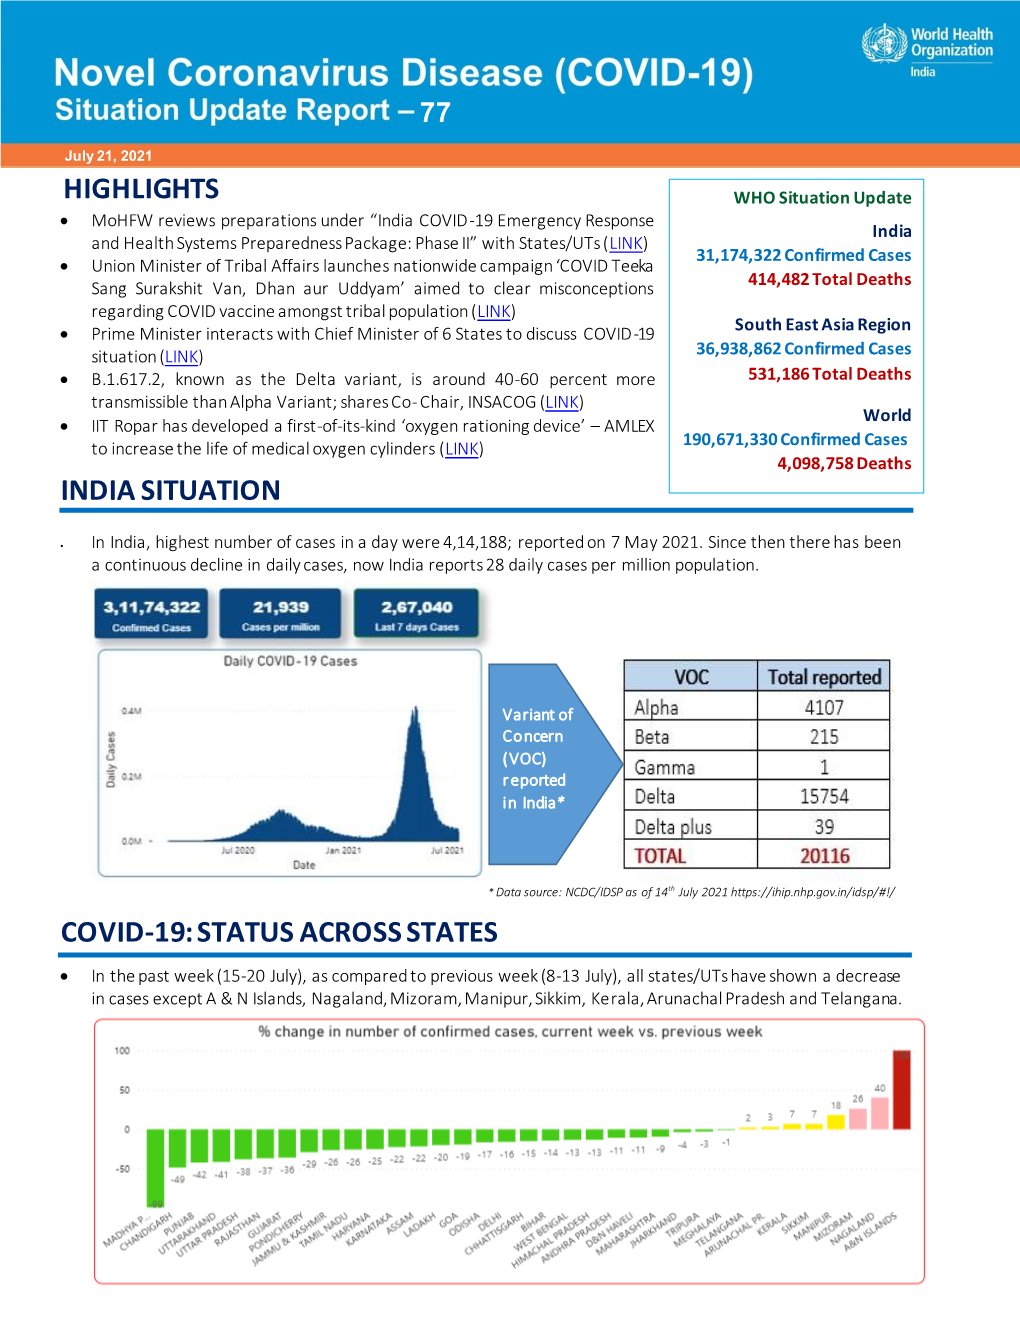 Highlights India Situation Covid-19